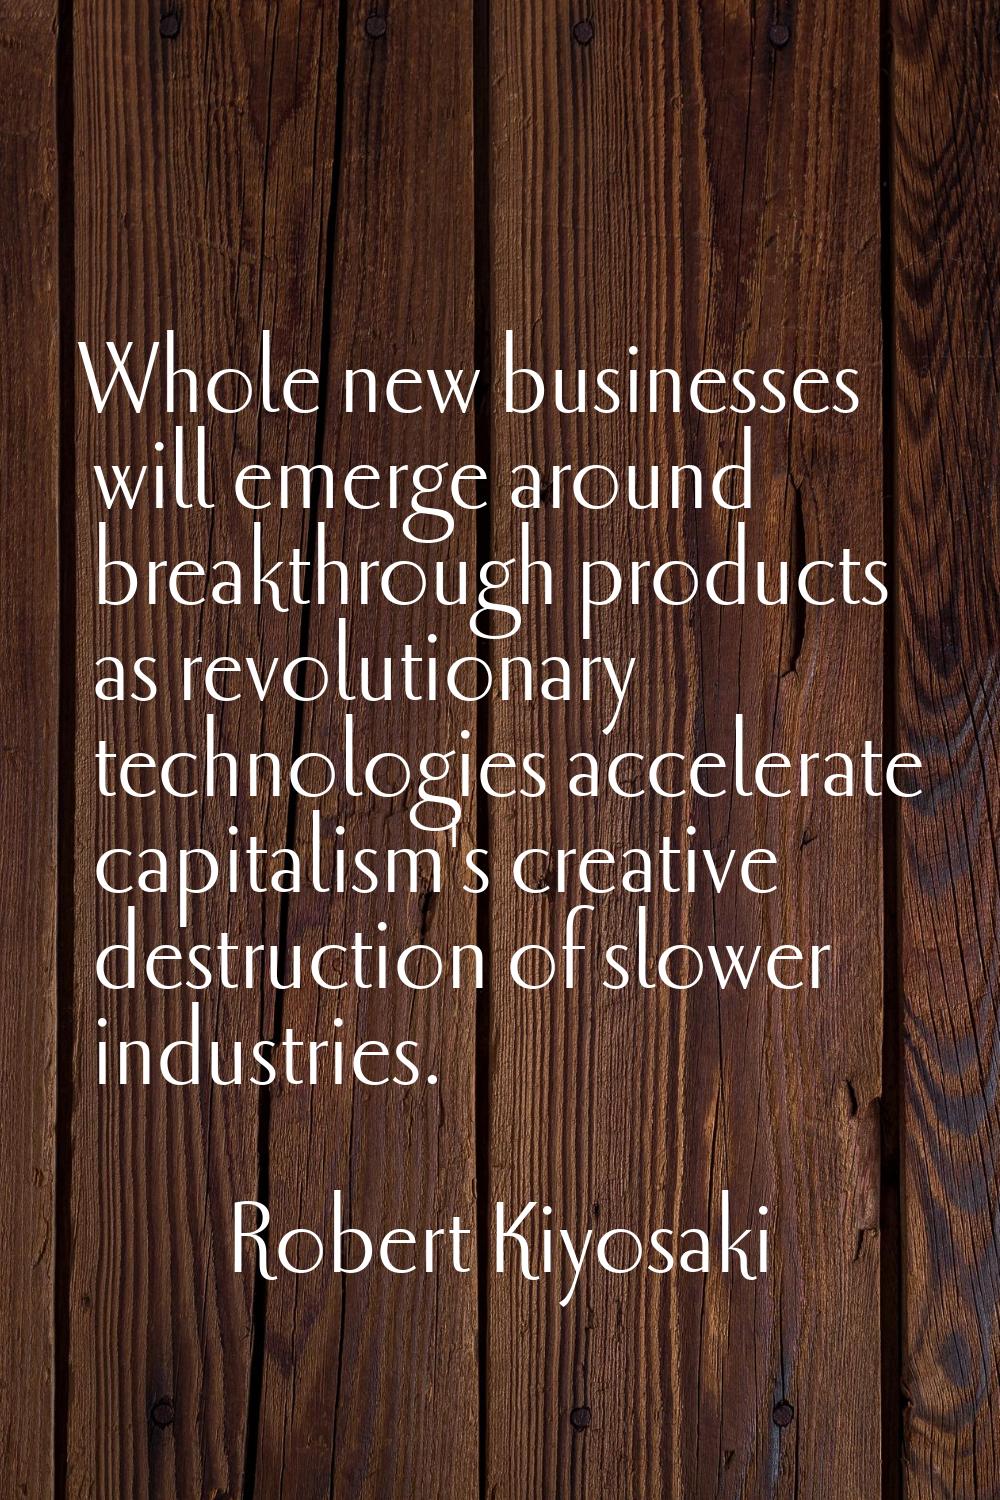 Whole new businesses will emerge around breakthrough products as revolutionary technologies acceler